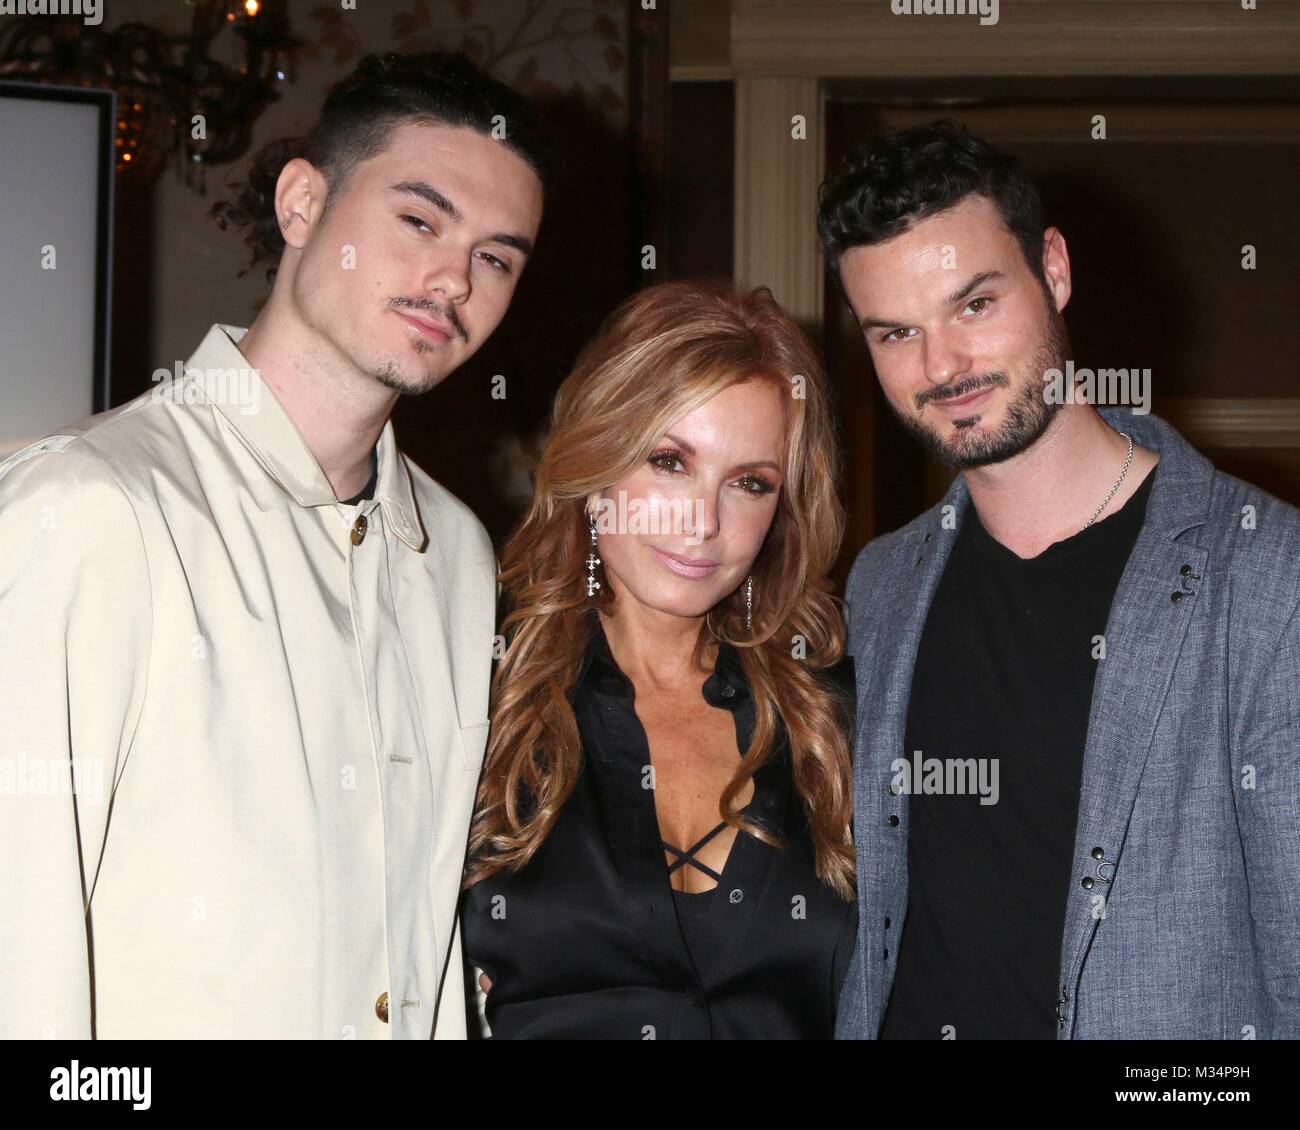 Landon Recht, Tracey Bregman, Austin Recht in attendance for Tracey Bregman 35th Anniversary on THE YOUNG AND THE RESTLESS, CBS TV City, Los Angeles, CA February 2, 2018. Photo By: Priscilla Grant/Everett Collection Stock Photo